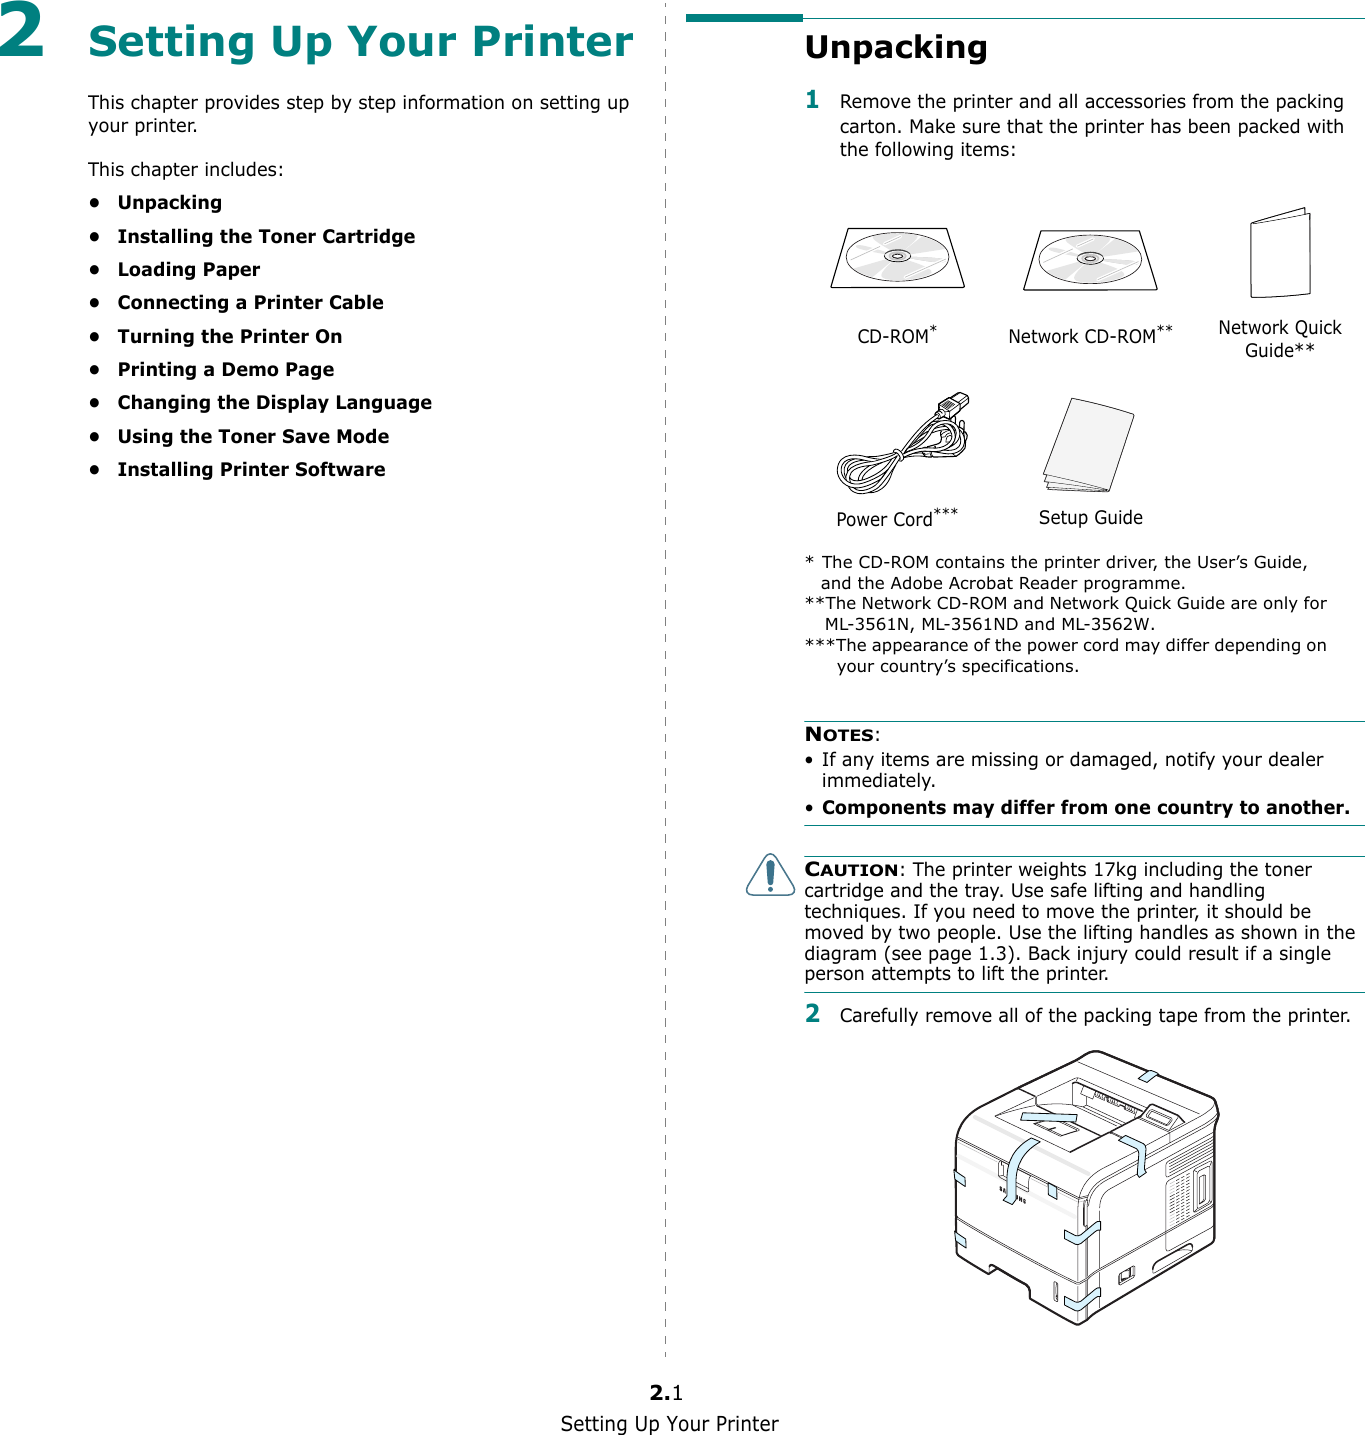 Setting Up Your Printer2.12Setting Up Your PrinterThis chapter provides step by step information on setting up your printer. This chapter includes:•Unpacking• Installing the Toner Cartridge•Loading Paper• Connecting a Printer Cable• Turning the Printer On• Printing a Demo Page• Changing the Display Language• Using the Toner Save Mode• Installing Printer SoftwareUnpacking1Remove the printer and all accessories from the packing carton. Make sure that the printer has been packed with the following items:NOTES:• If any items are missing or damaged, notify your dealer immediately. •Components may differ from one country to another.CAUTION: The printer weights 17kg including the toner cartridge and the tray. Use safe lifting and handling techniques. If you need to move the printer, it should be moved by two people. Use the lifting handles as shown in the diagram (see page 1.3). Back injury could result if a single person attempts to lift the printer.2Carefully remove all of the packing tape from the printer. CD-ROM** The CD-ROM contains the printer driver, the User’s Guide, and the Adobe Acrobat Reader programme.Network CD-ROM****The Network CD-ROM and Network Quick Guide are only for ML-3561N, ML-3561ND and ML-3562W.Network Quick Guide**Power Cord******The appearance of the power cord may differ depending on your country’s specifications.Setup Guide 